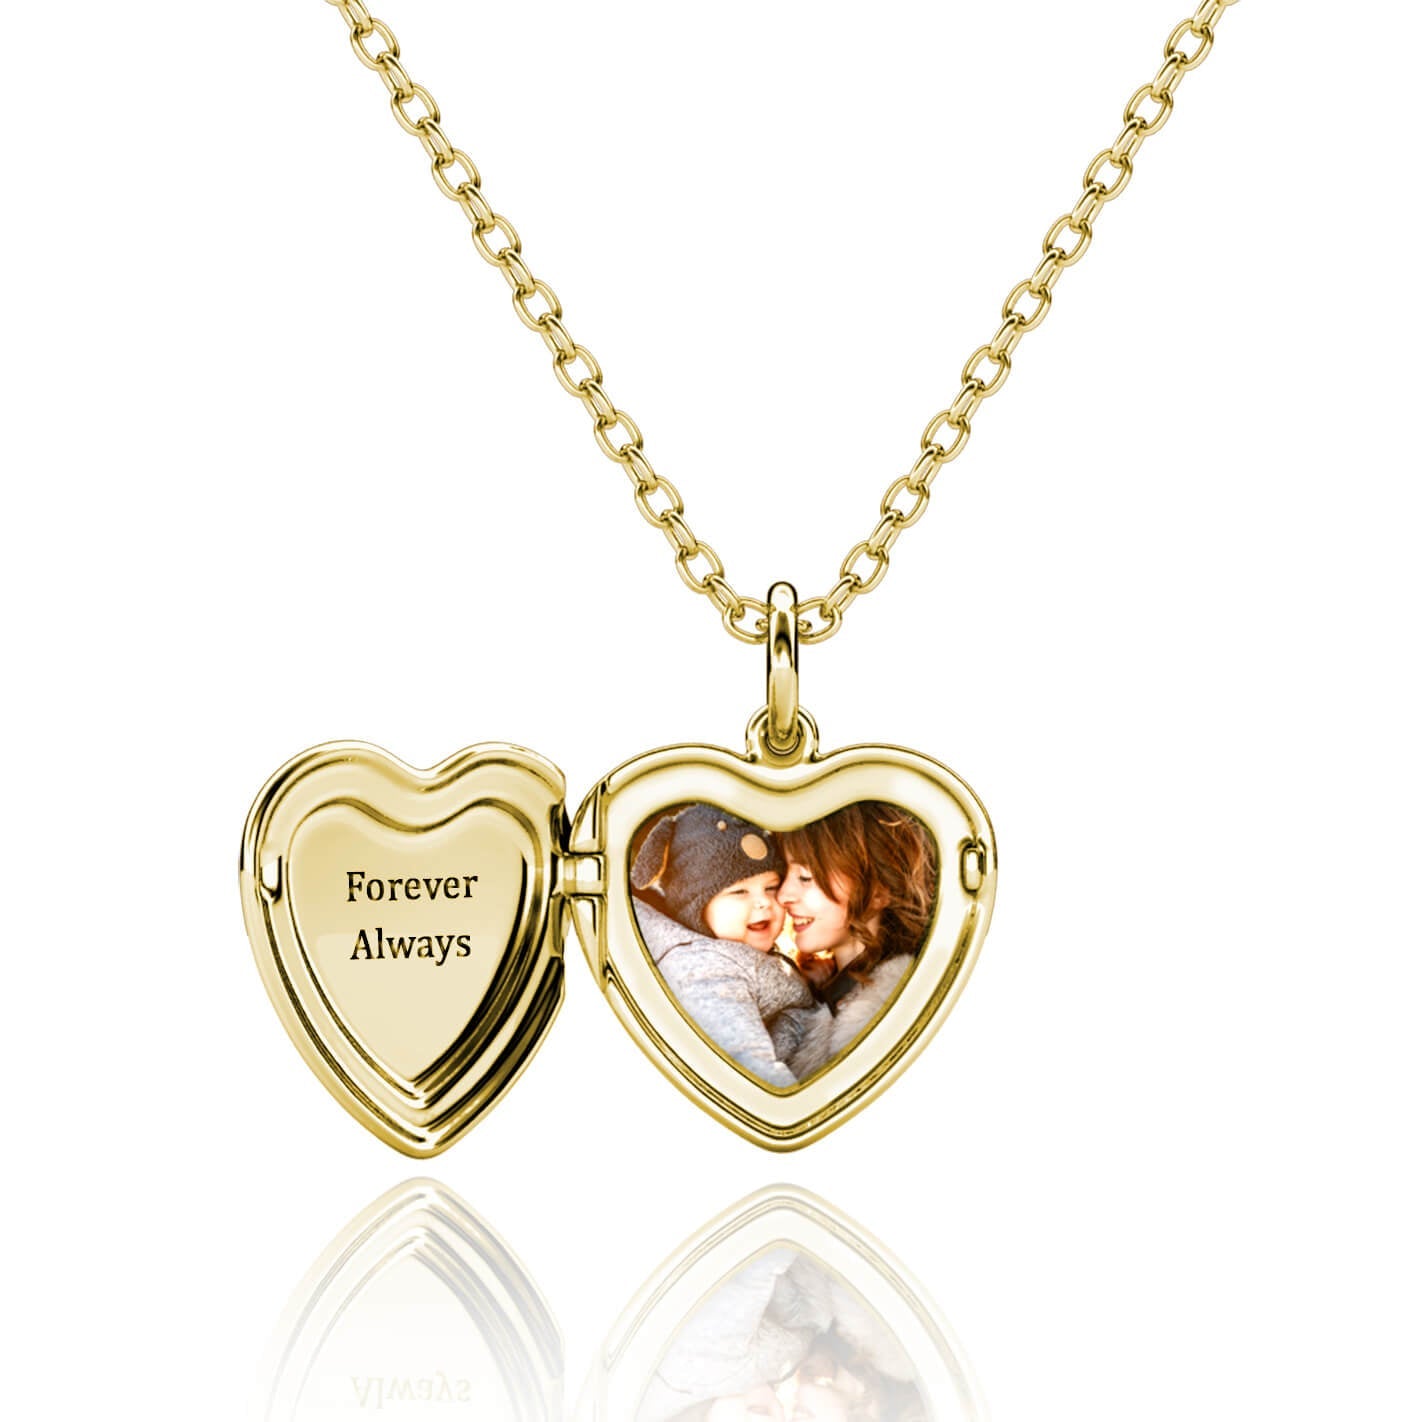 Heart Photo Locket Necklace with Engraving